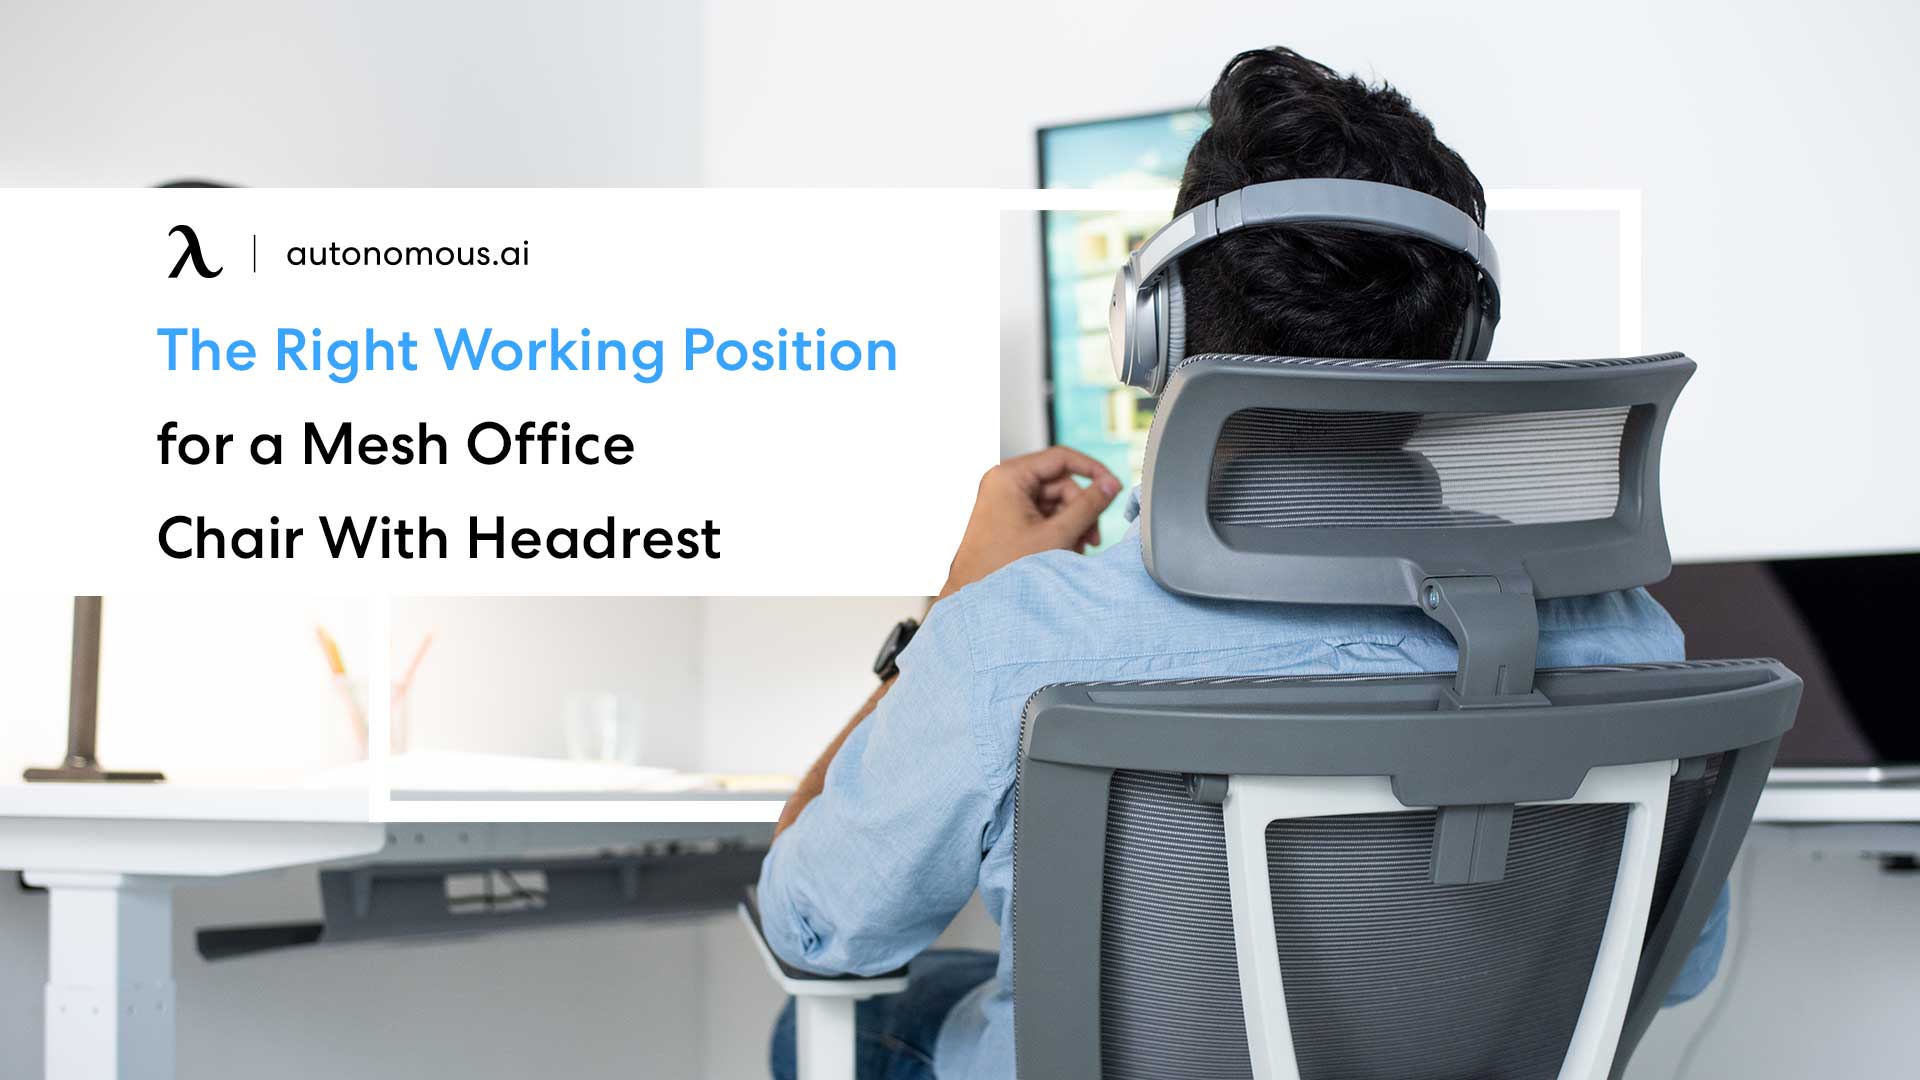 The Right Working Position for a Mesh Office Chair With Headrest